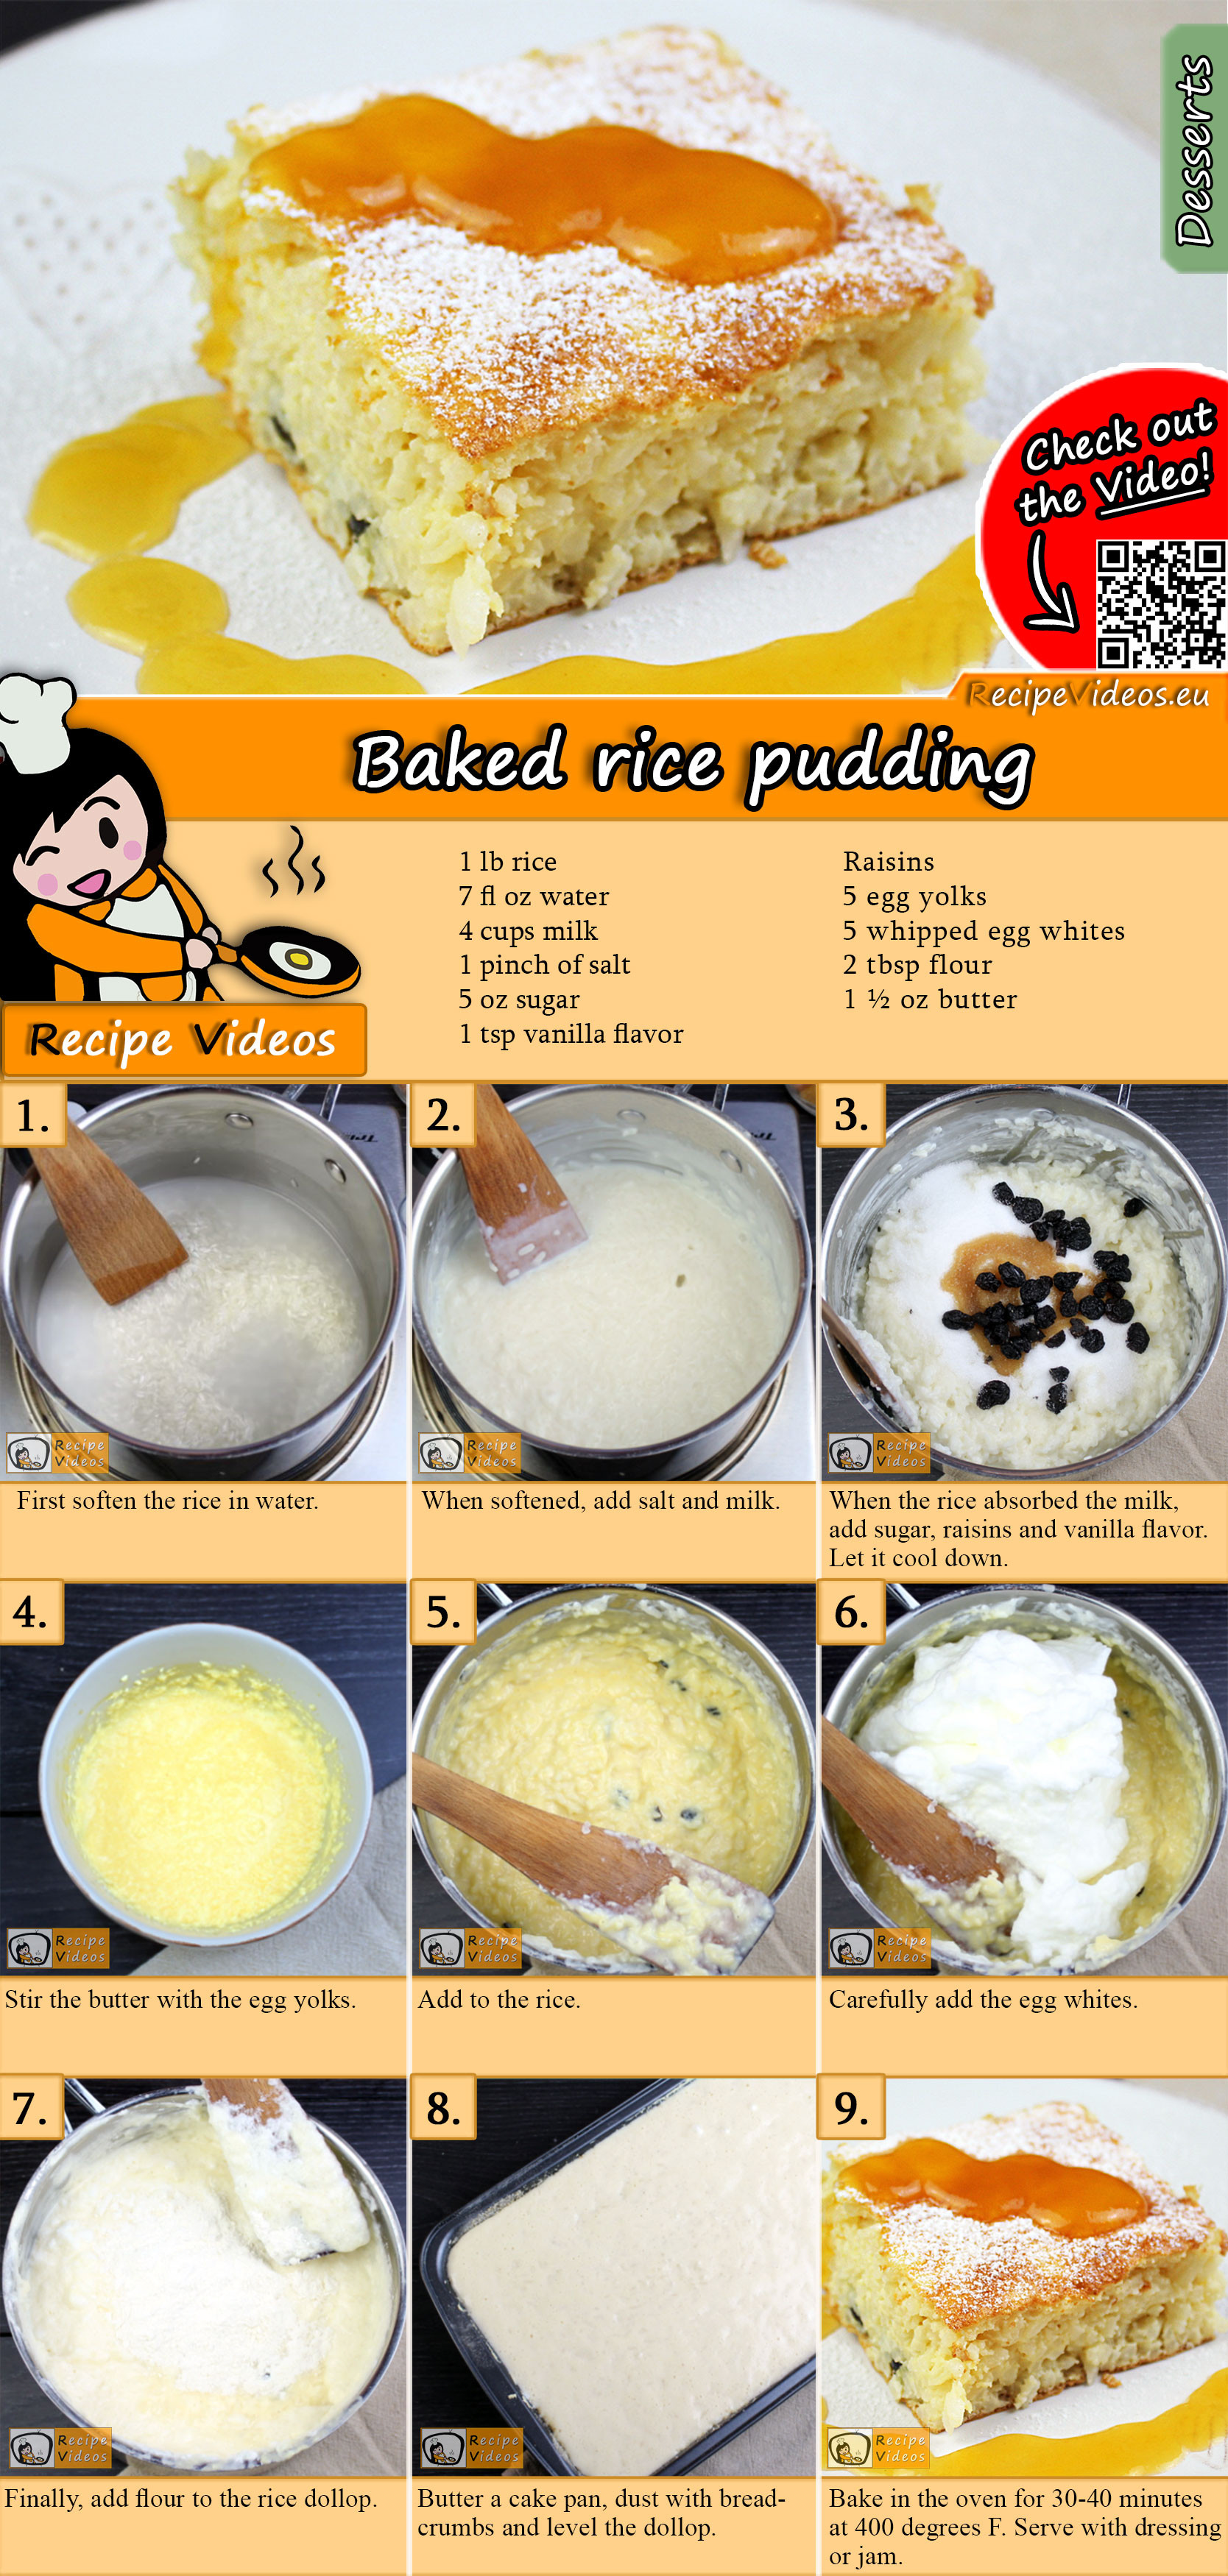 Baked rice pudding recipe with video